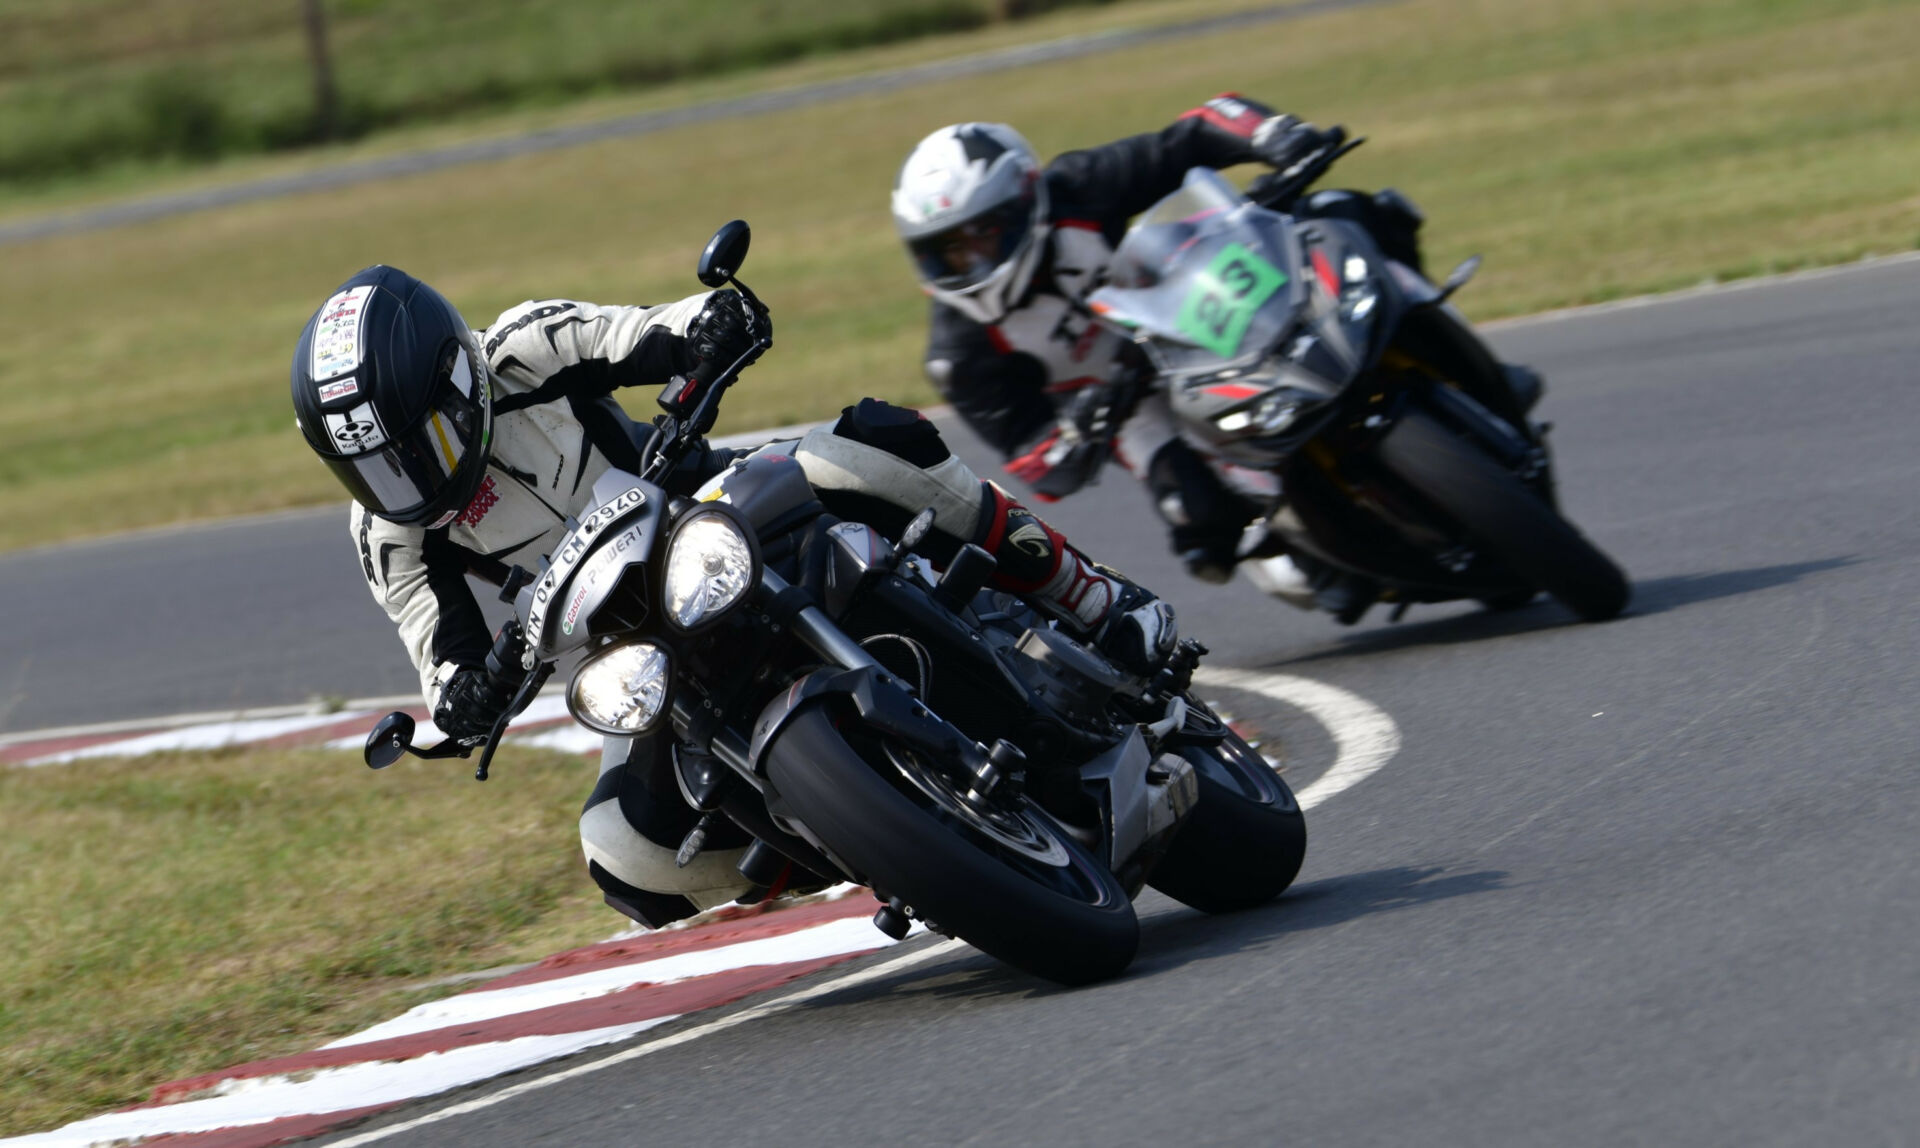 A California Superbike School instructor leading a student at Madras International Circuit in Chennai, India. Photo by Aditya Bedre, courtesy California Superbike School.